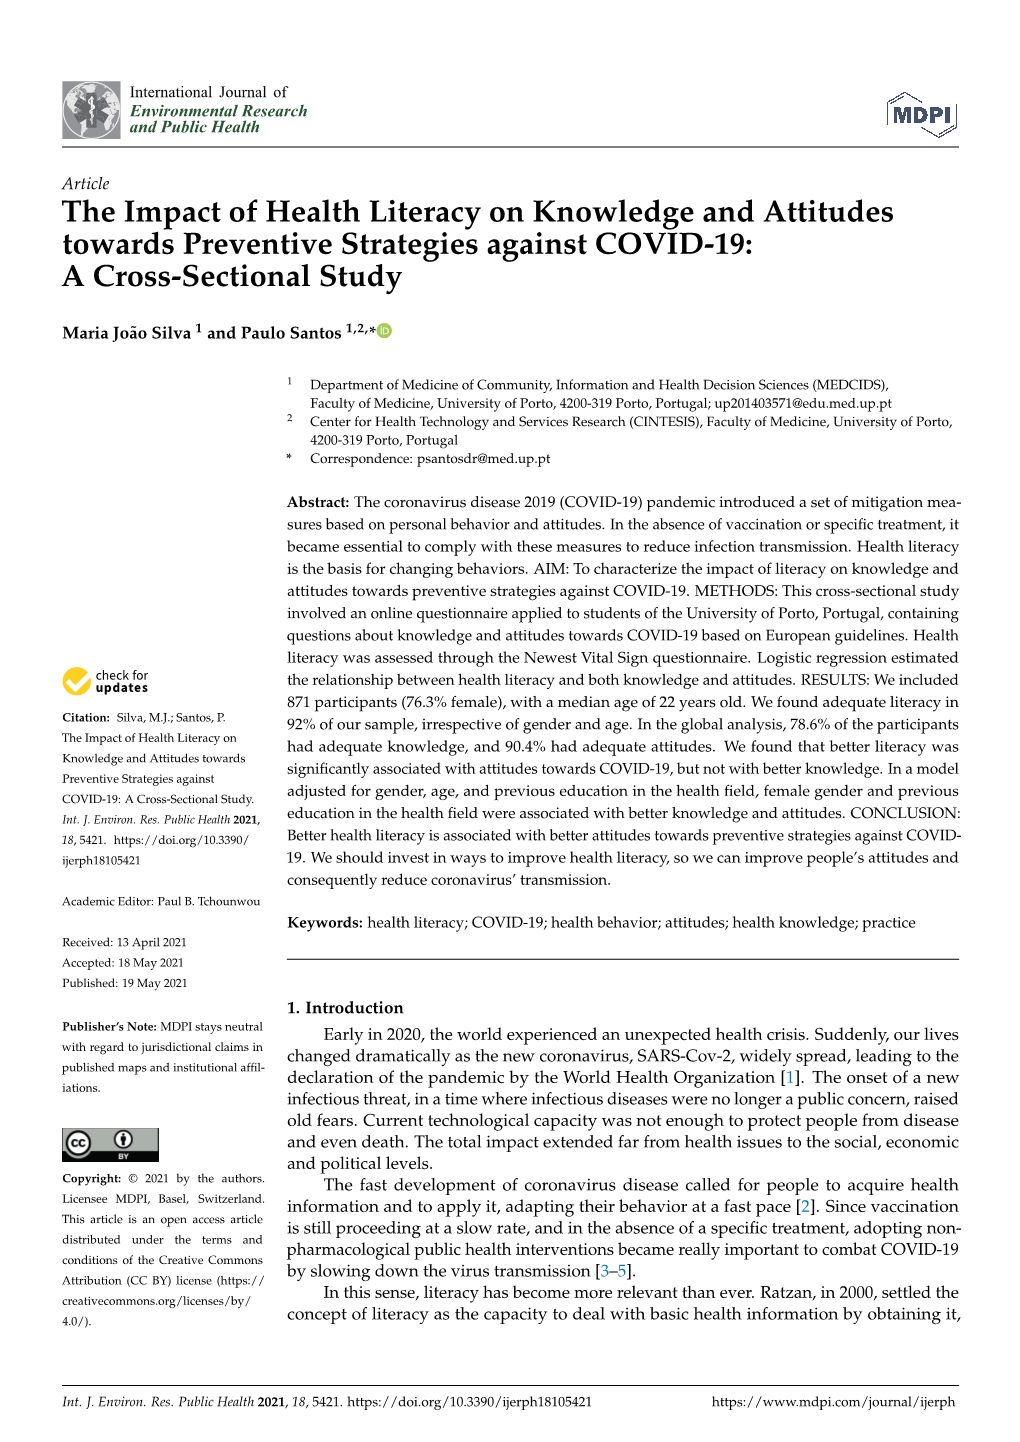 The Impact of Health Literacy on Knowledge and Attitudes Towards Preventive Strategies Against COVID-19: a Cross-Sectional Study